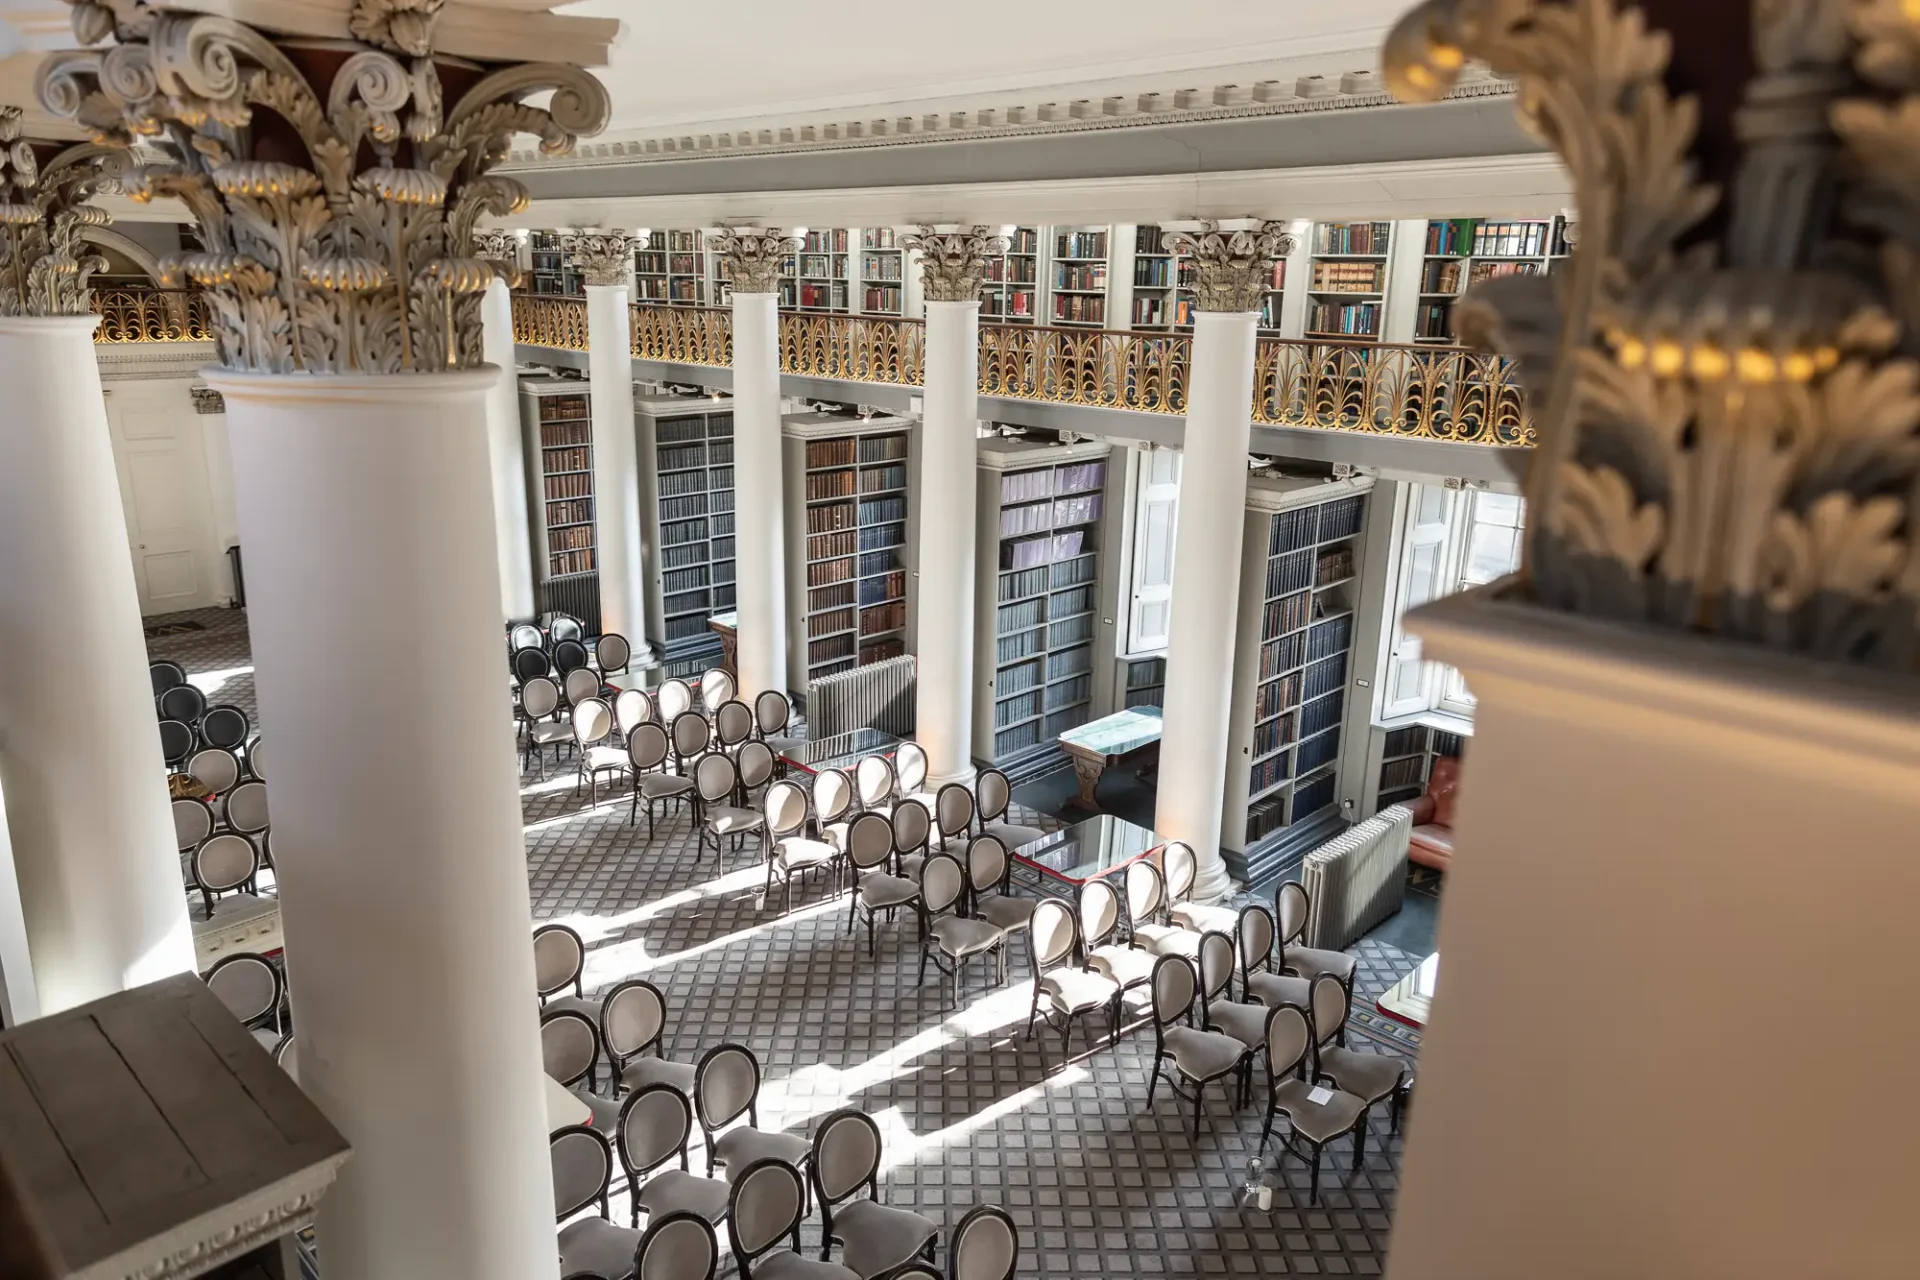 Elegant library hall with rows of empty chairs, surrounded by tall columns and ornate balconies filled with books.